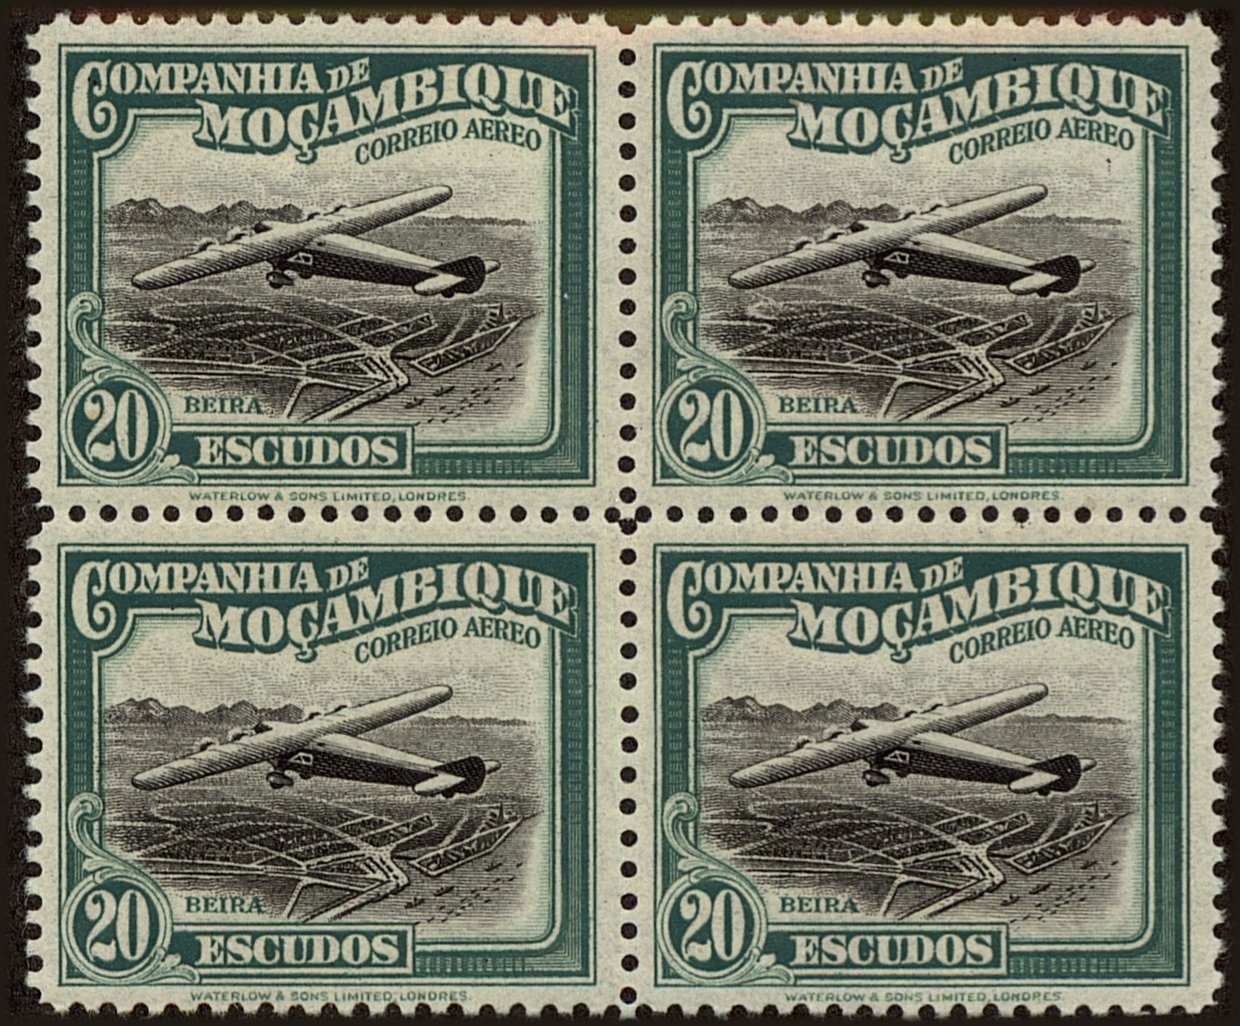 Front view of Mozambique Company C15 collectors stamp